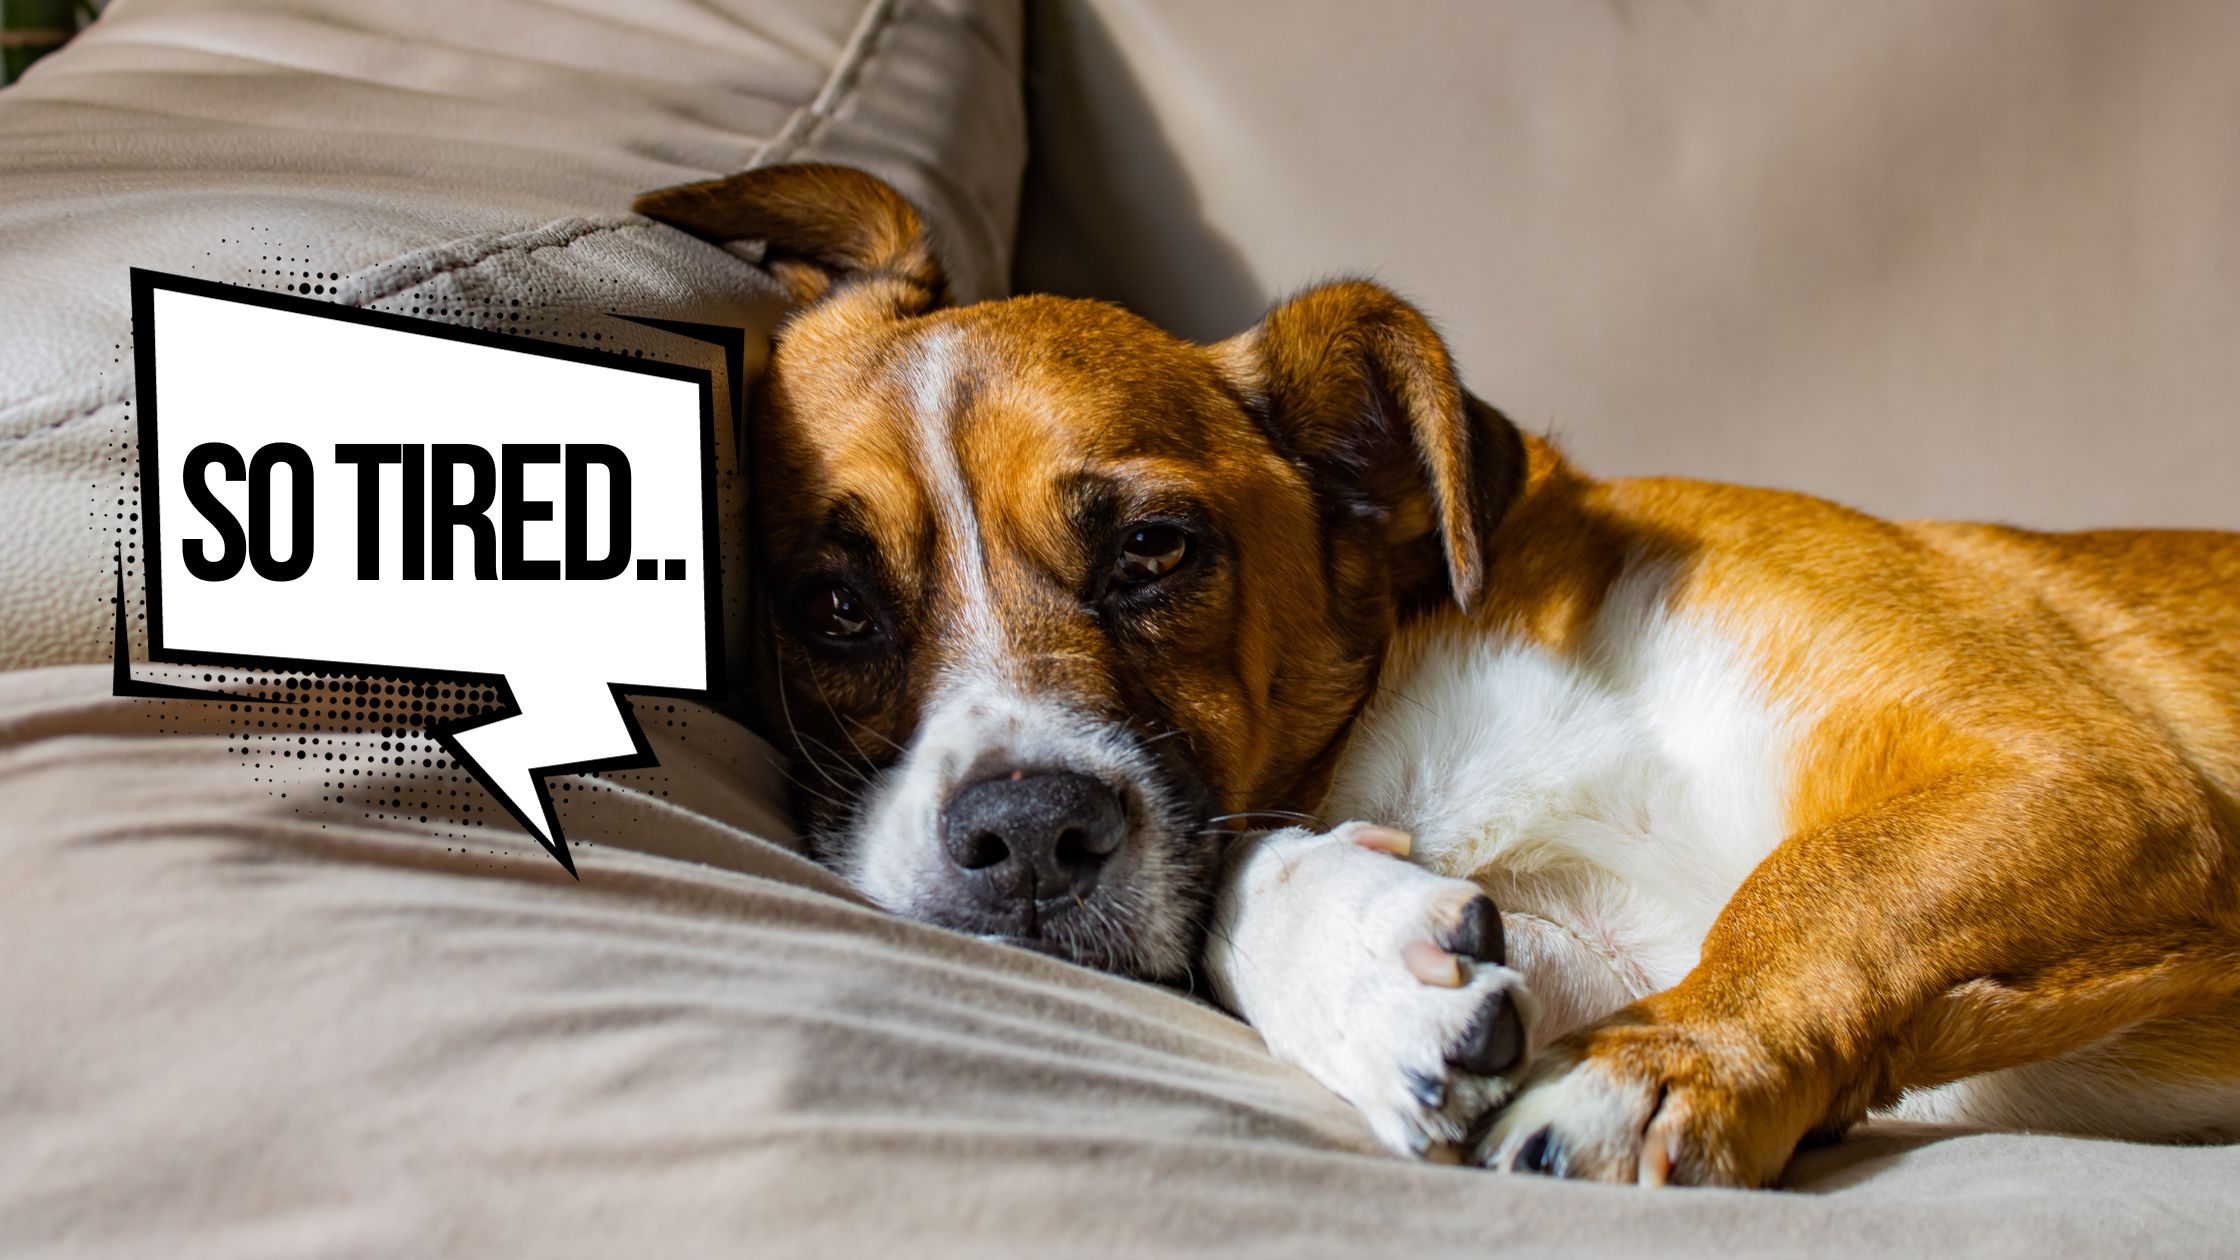 HOW TO KNOW IF YOUR DOG IS TIRED